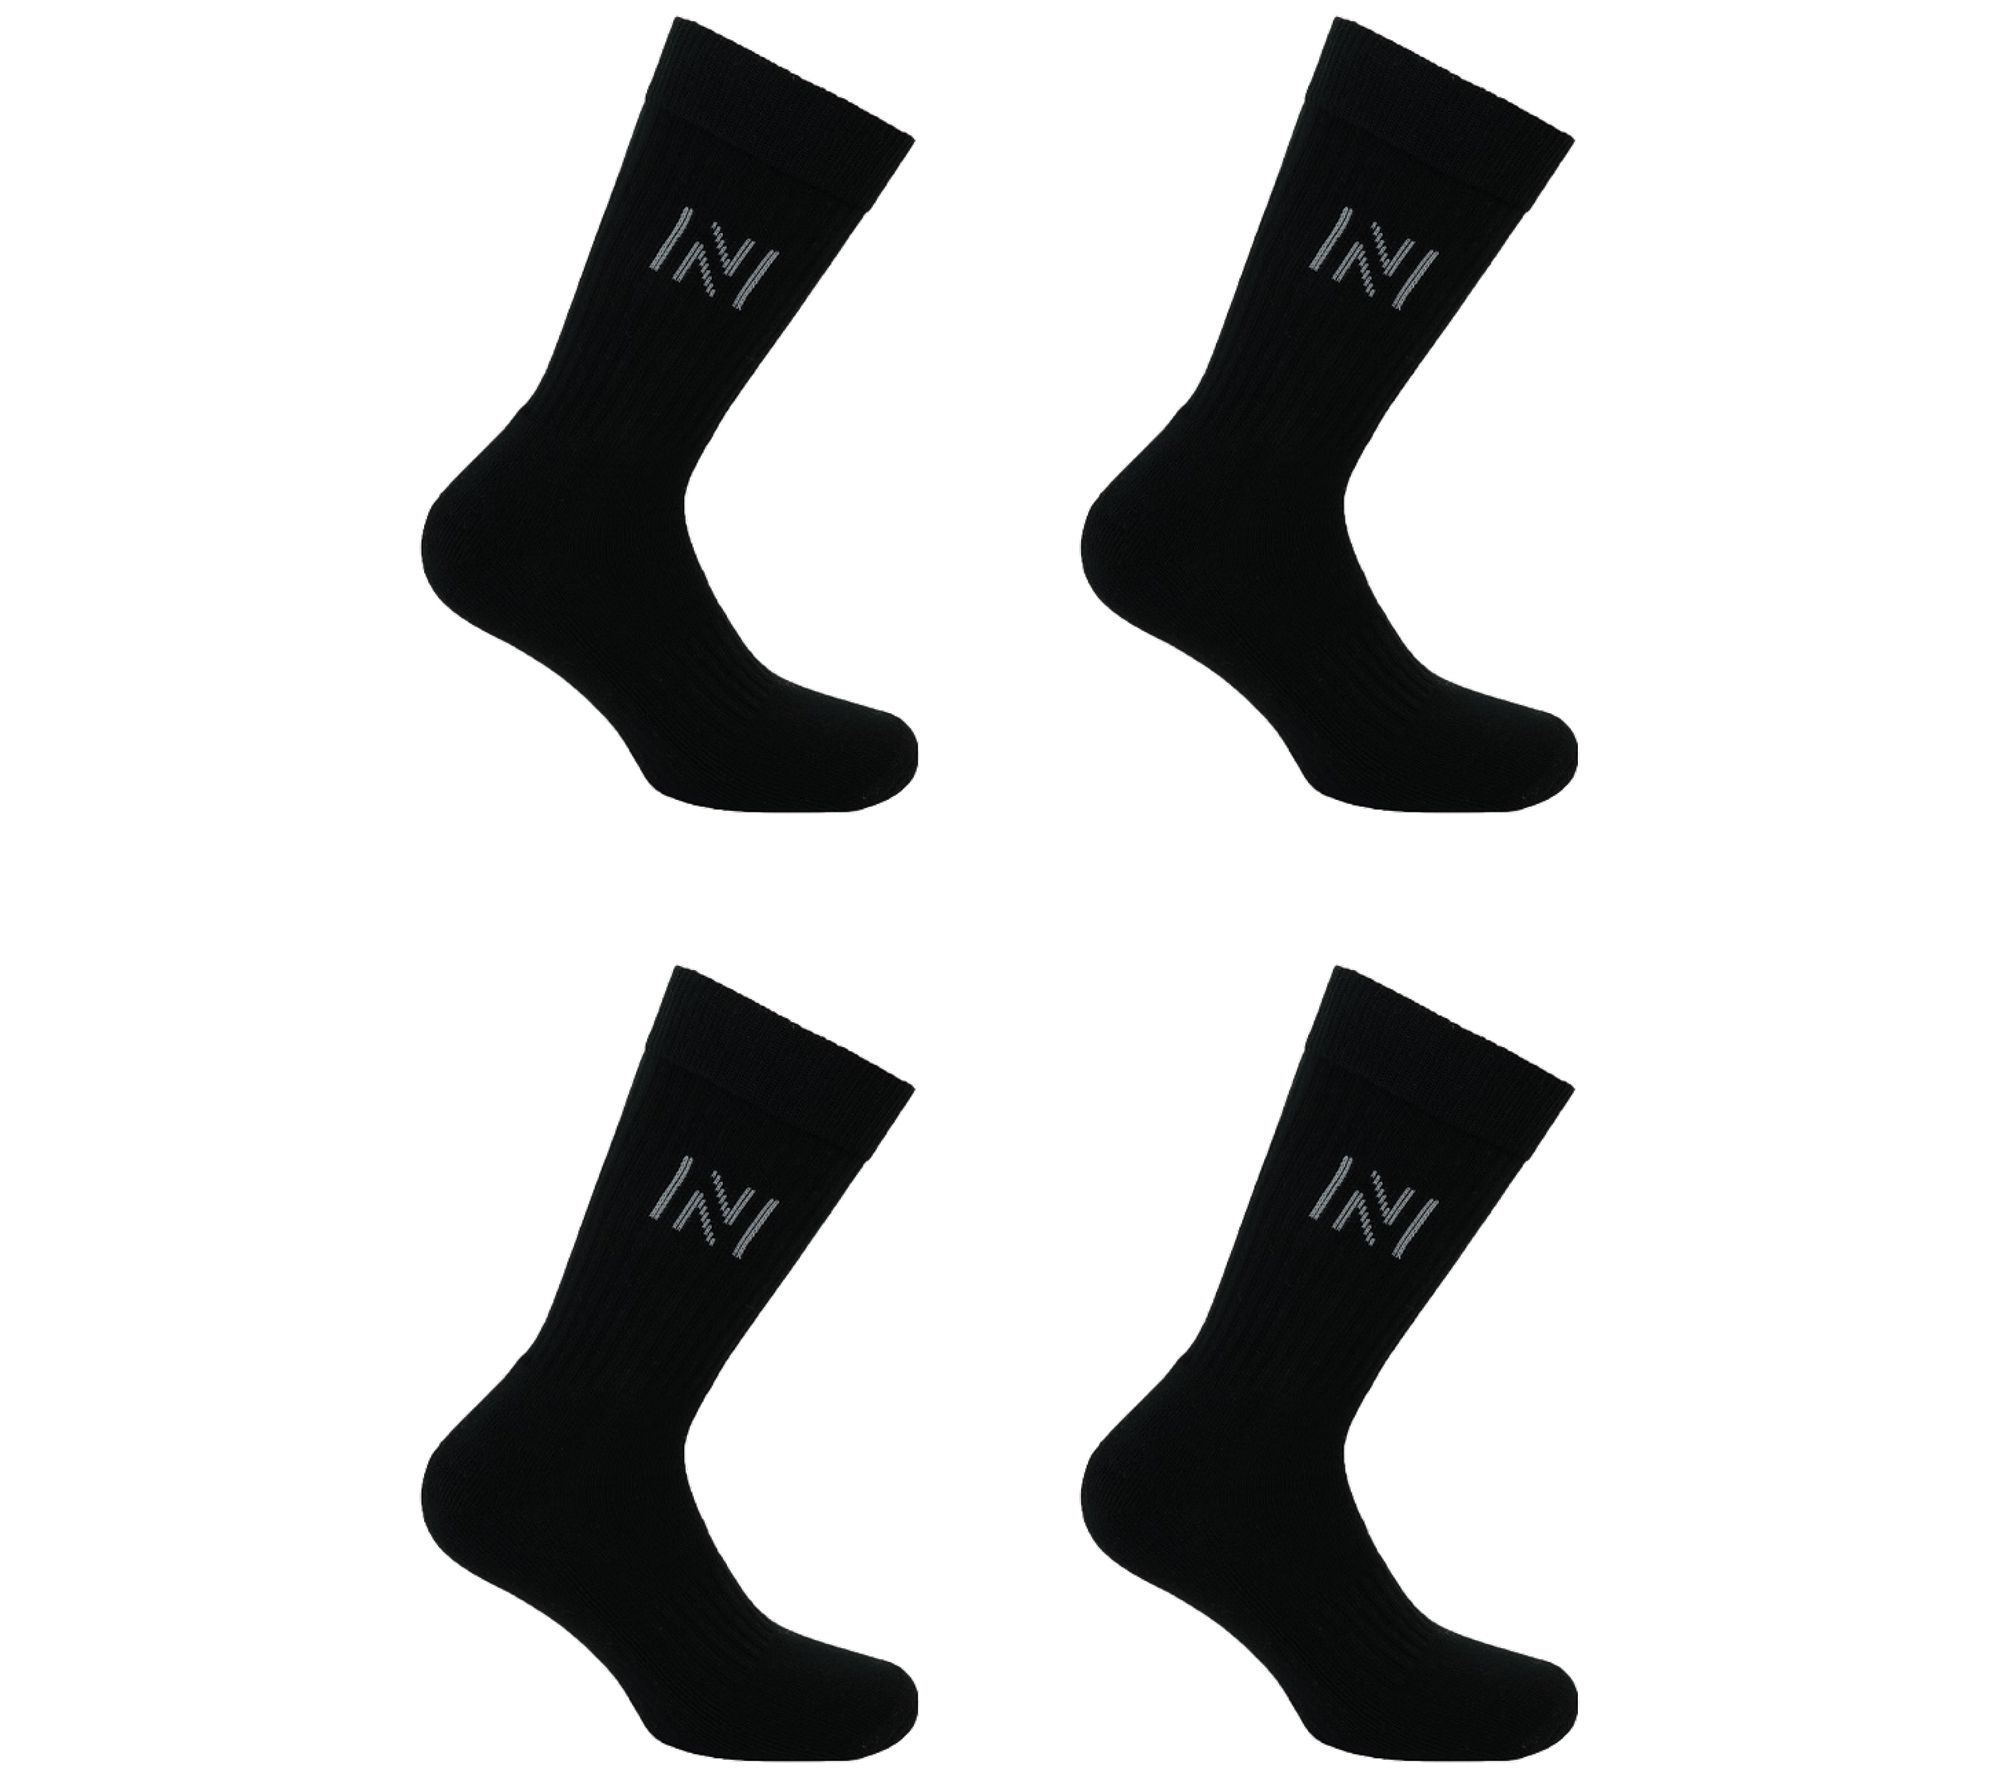 Barkley 2 Pair Pack of Cotton Sports Socks with Cushioning